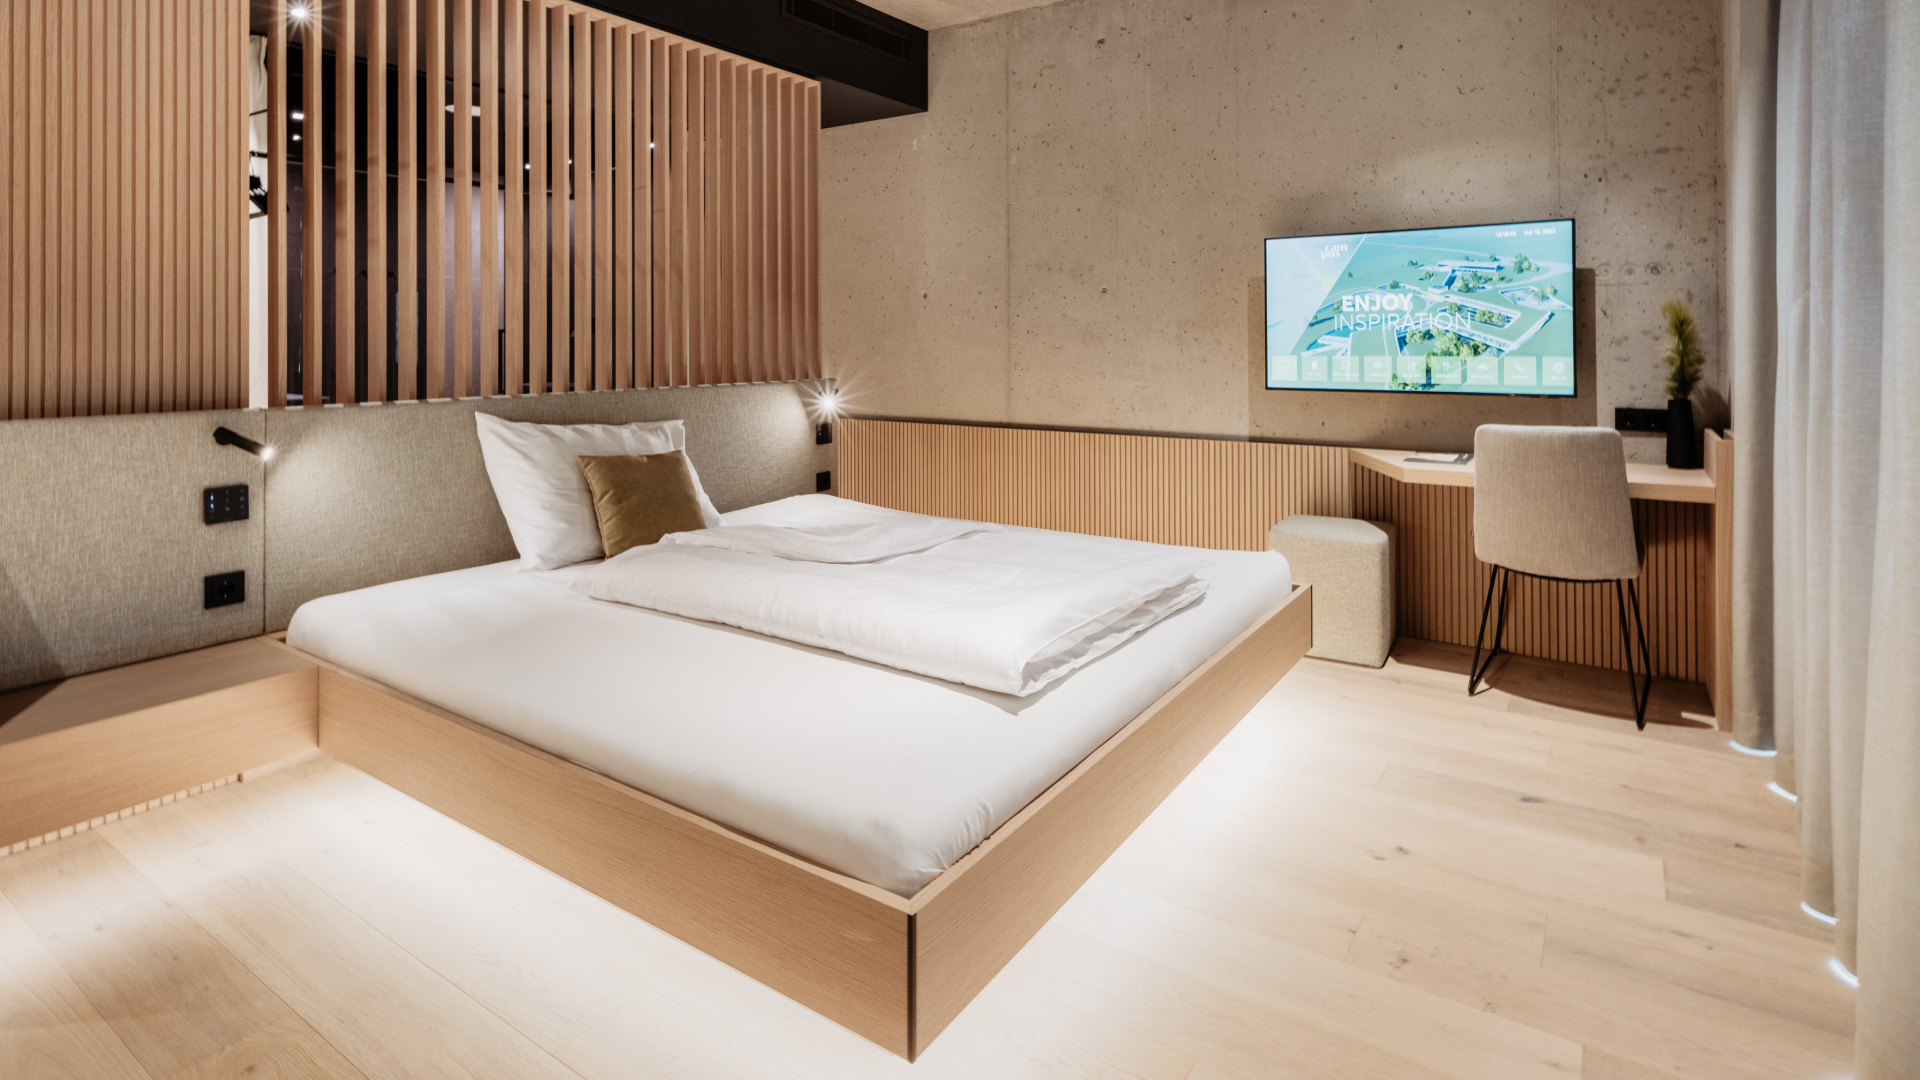 State-of-the-art intelligent hotel rooms with maximum guest comfort